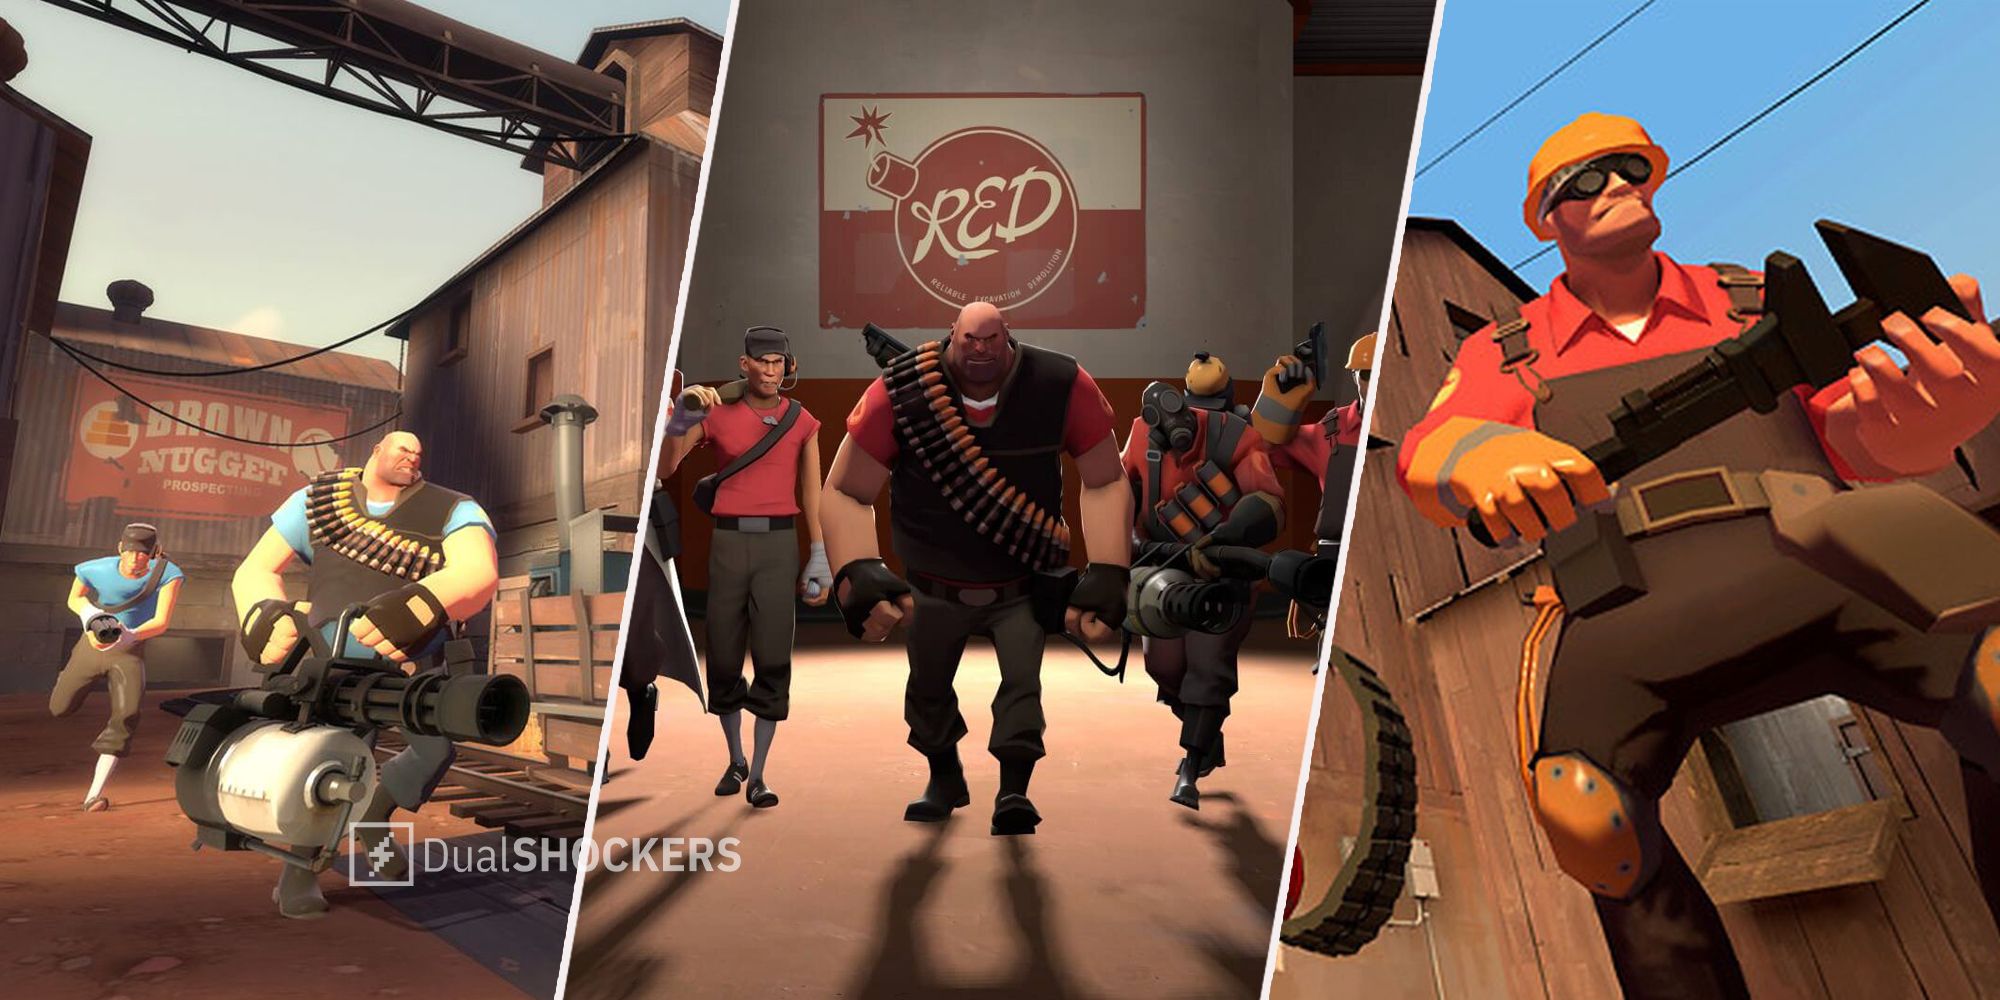 Team Fortress 2 Heavy Weapons Guy, Scout, Soldier, Sniper, Medic, Demoman